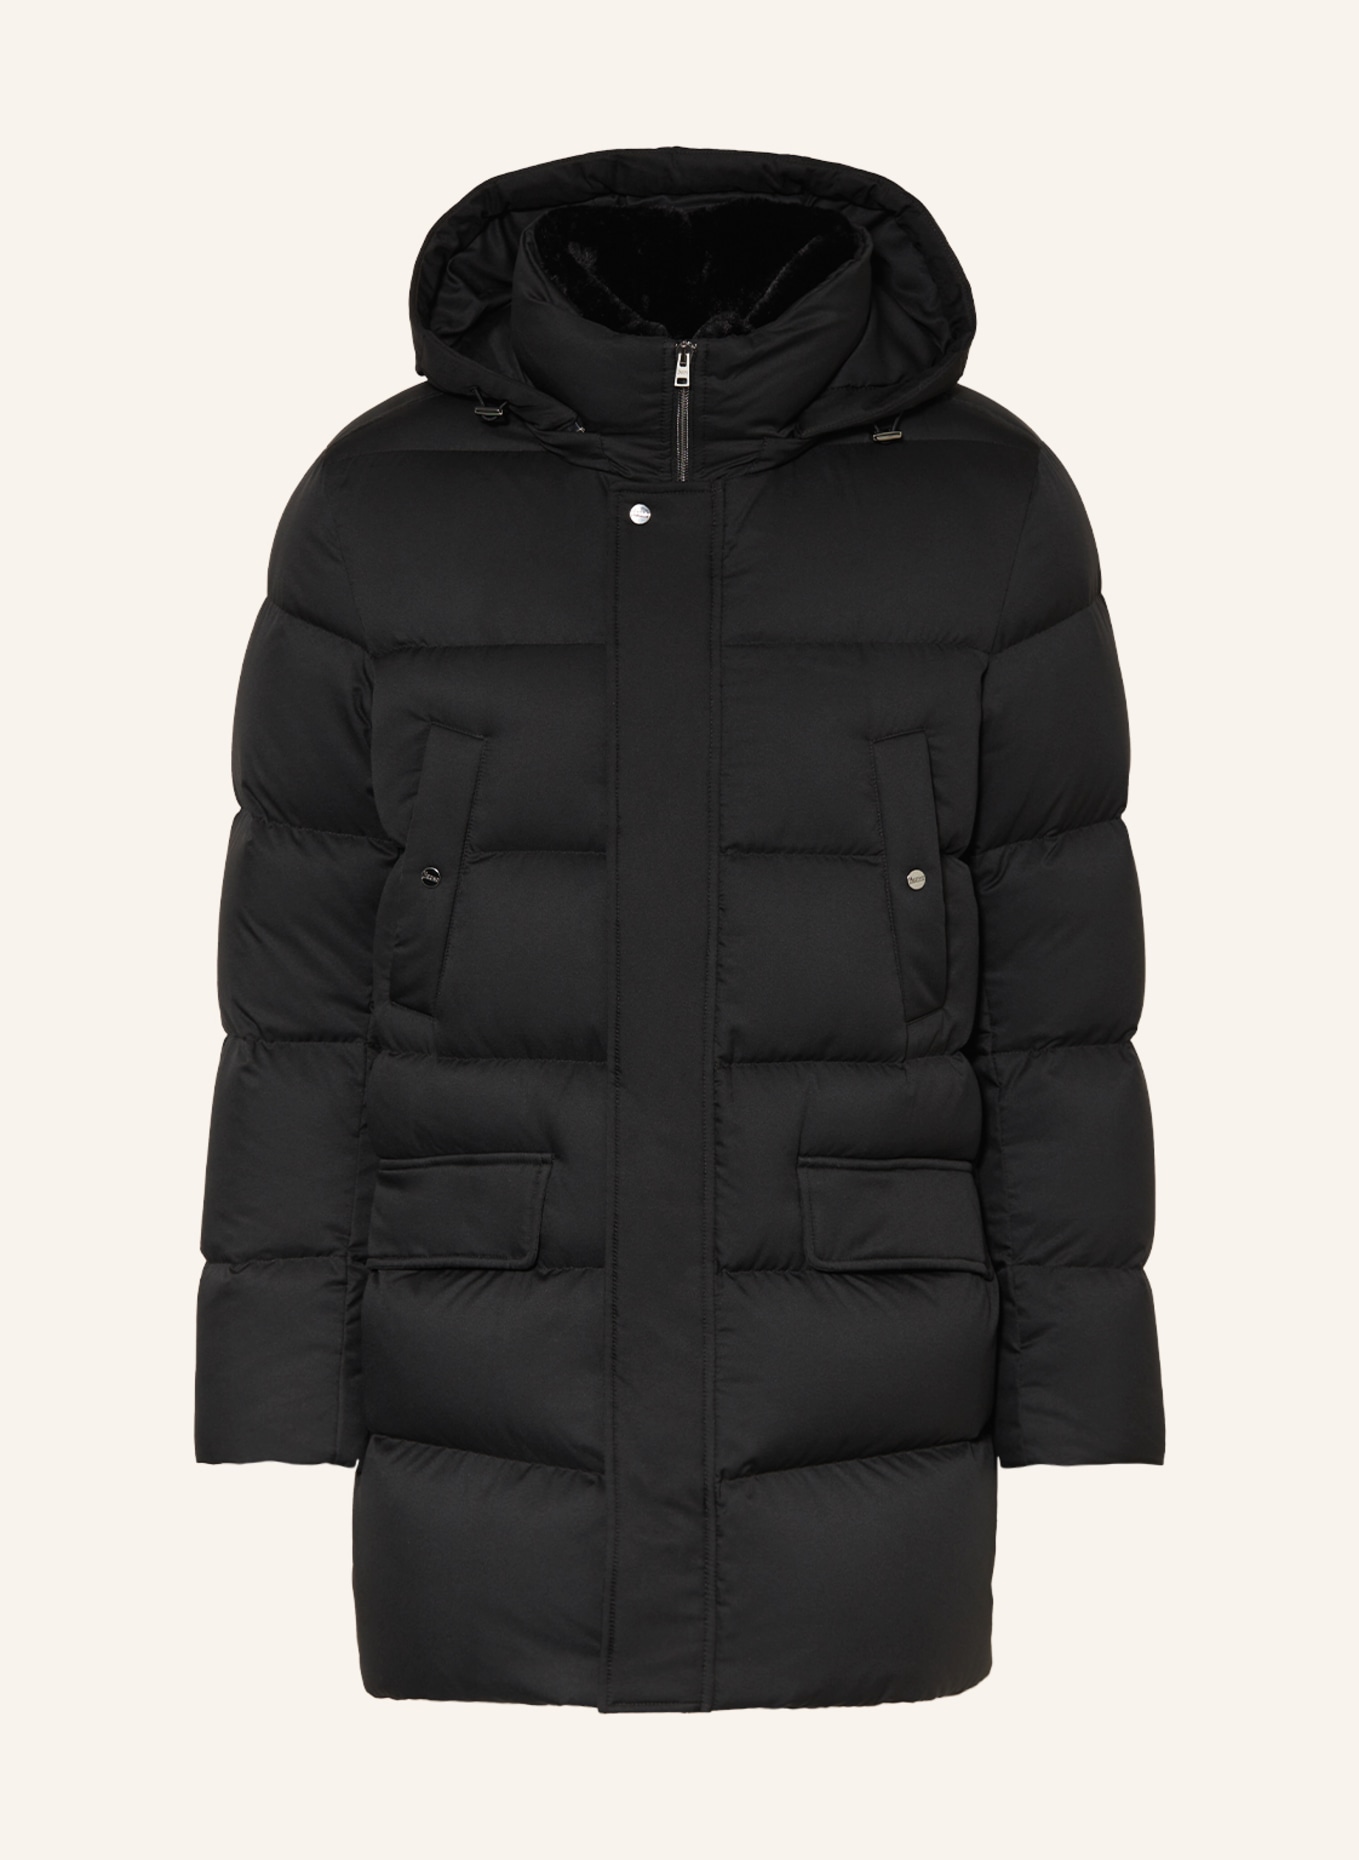 Long Black Puffer Jacket with Removable Hood